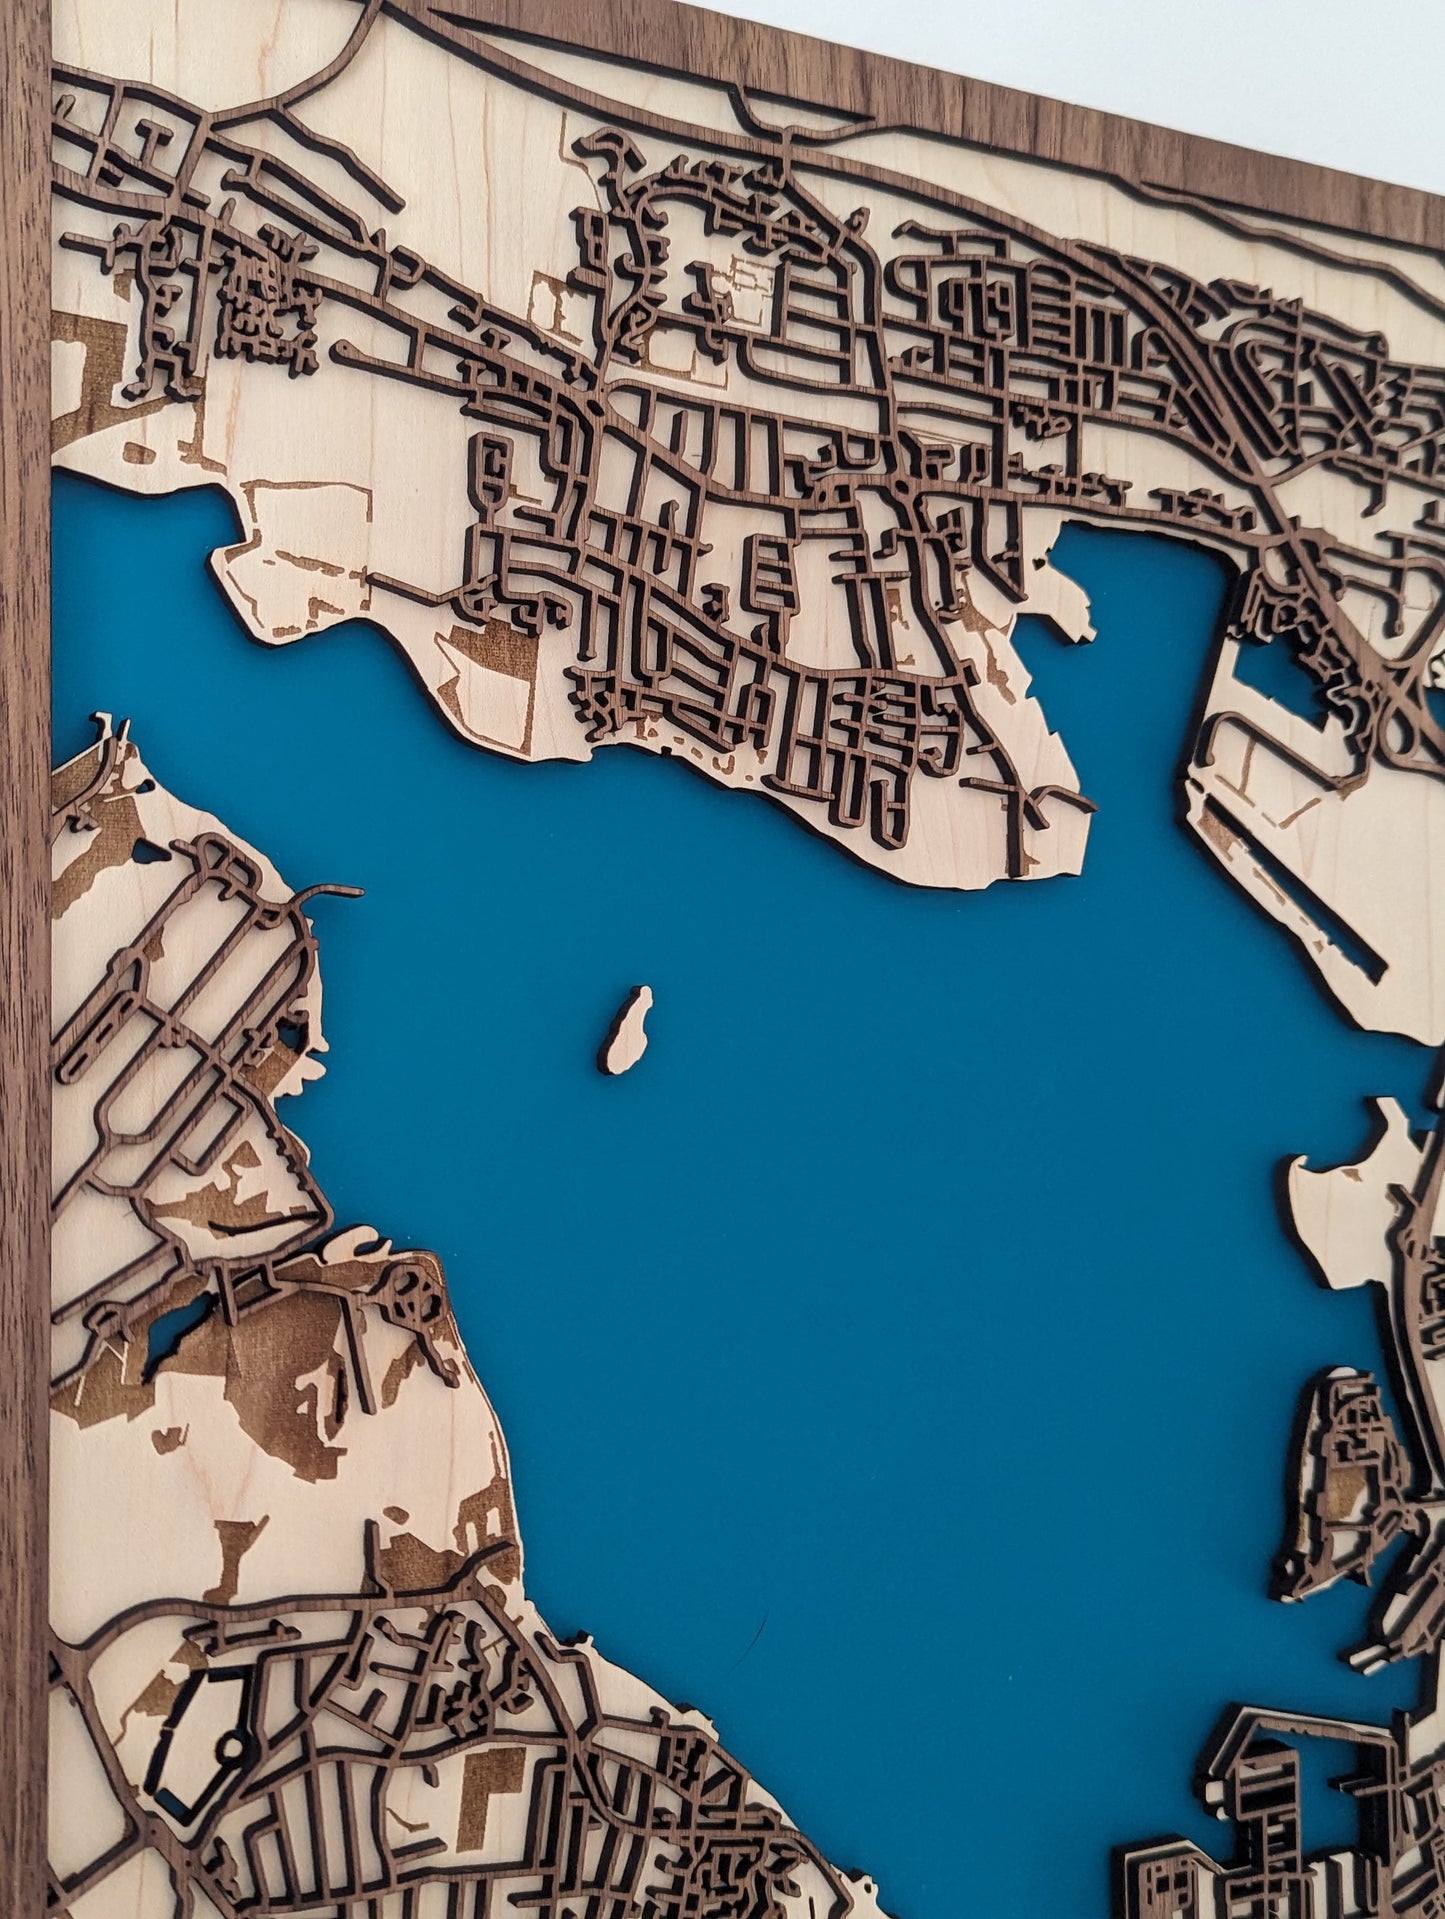 Portsmouth Harbour map